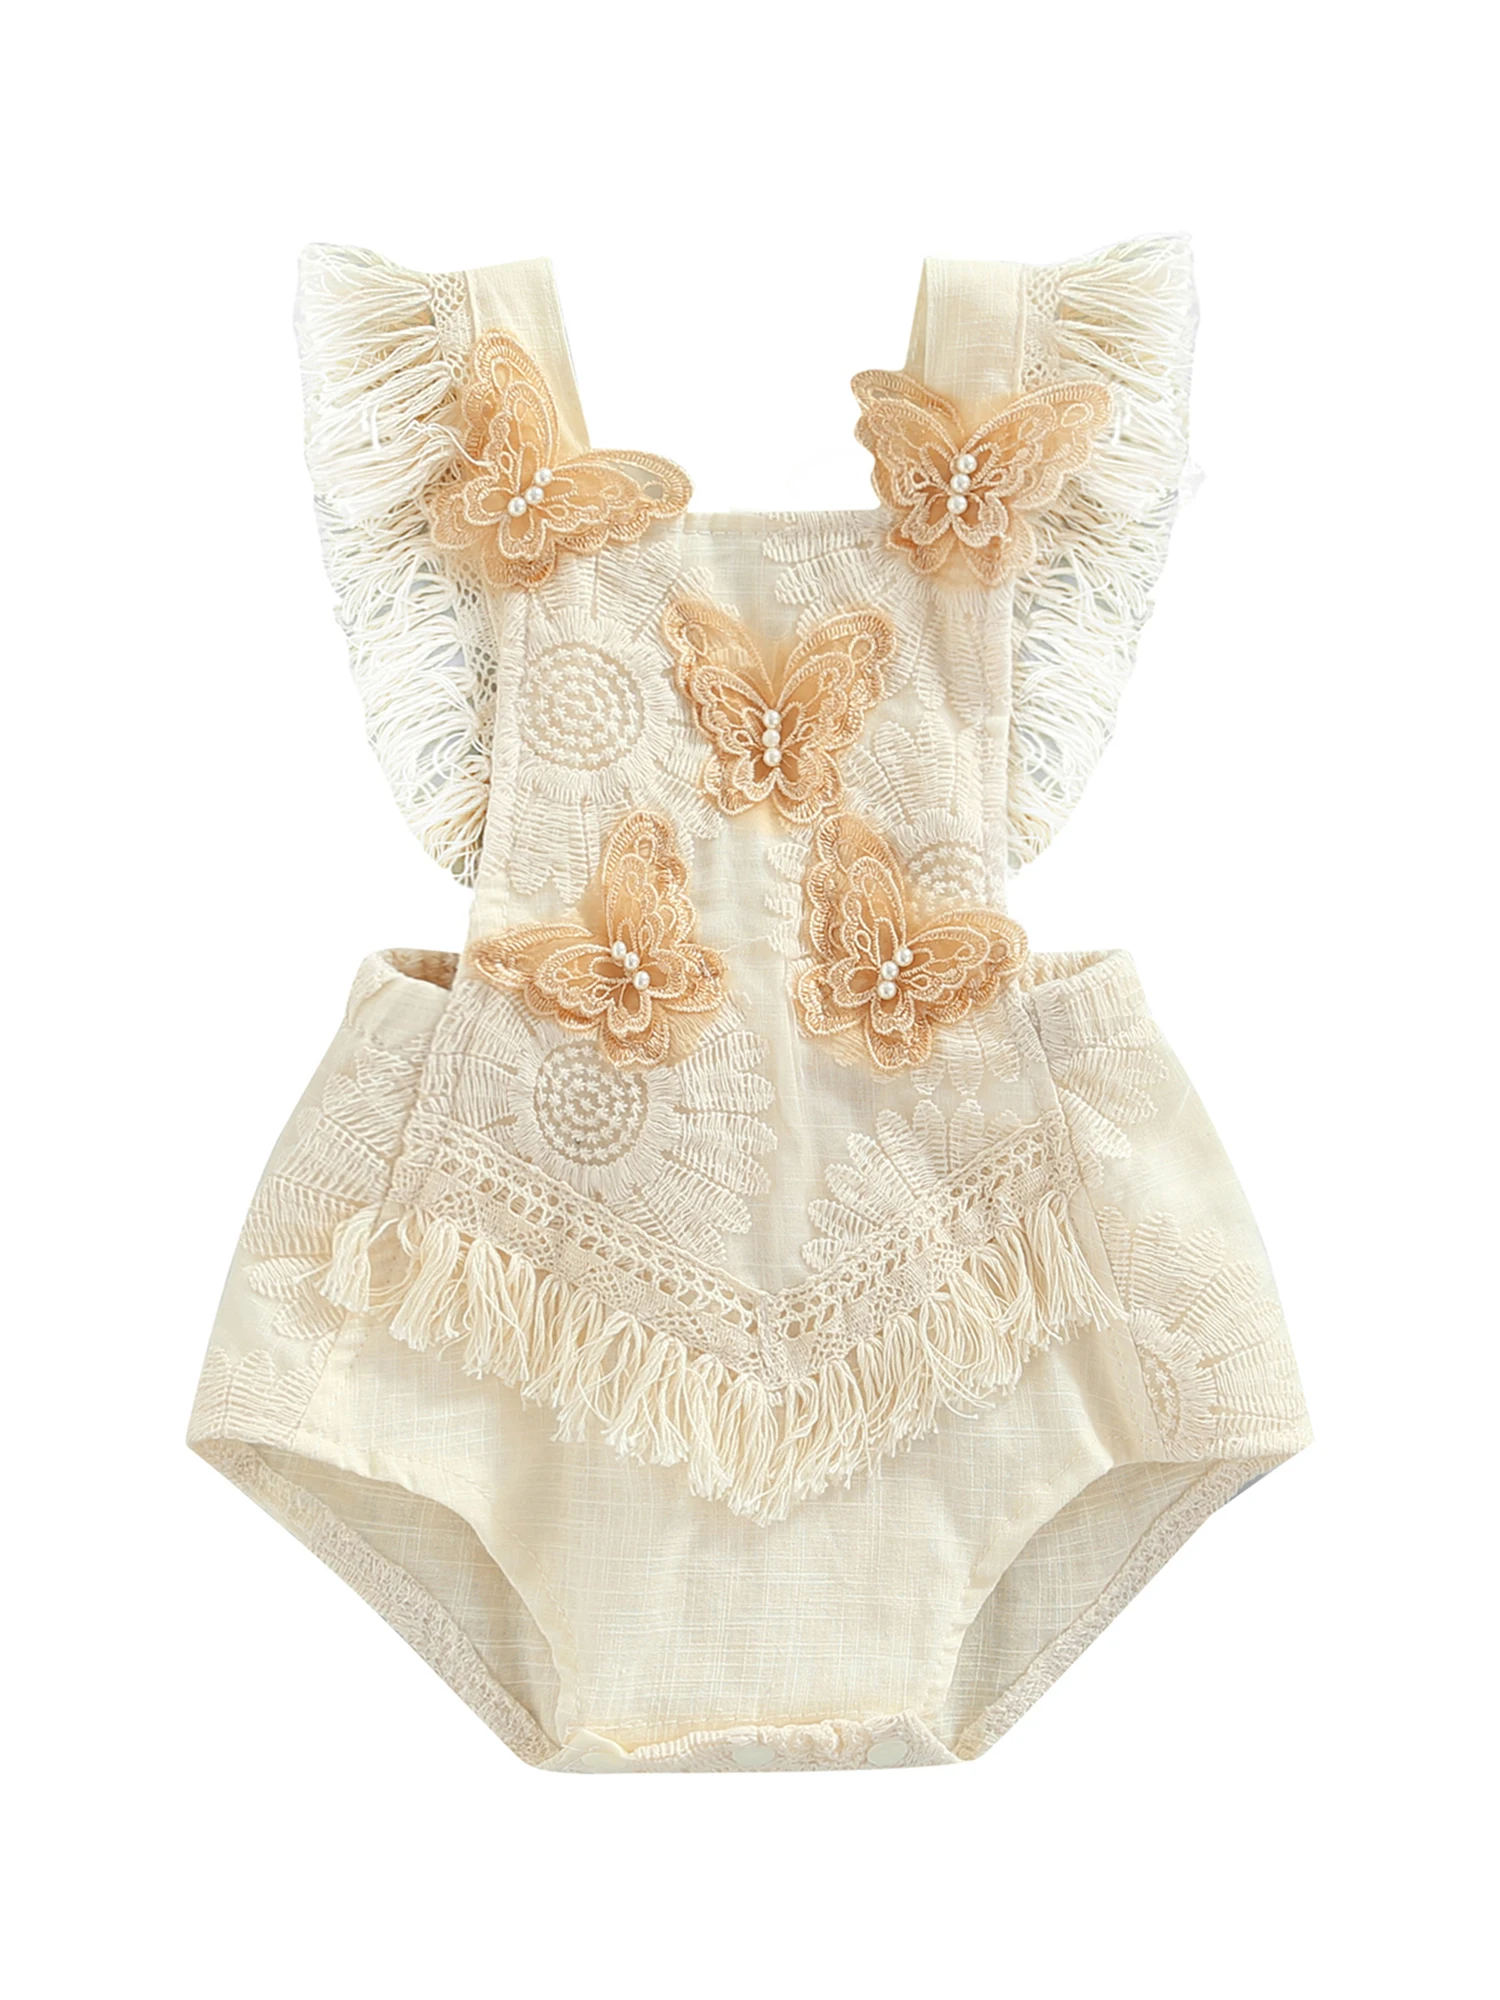 

Newborn Infant Baby Girls Summer Patchwork Romper Sleeveless Lace Tassel Butterfly Crochet Tie Up Playsuit for 0-24M